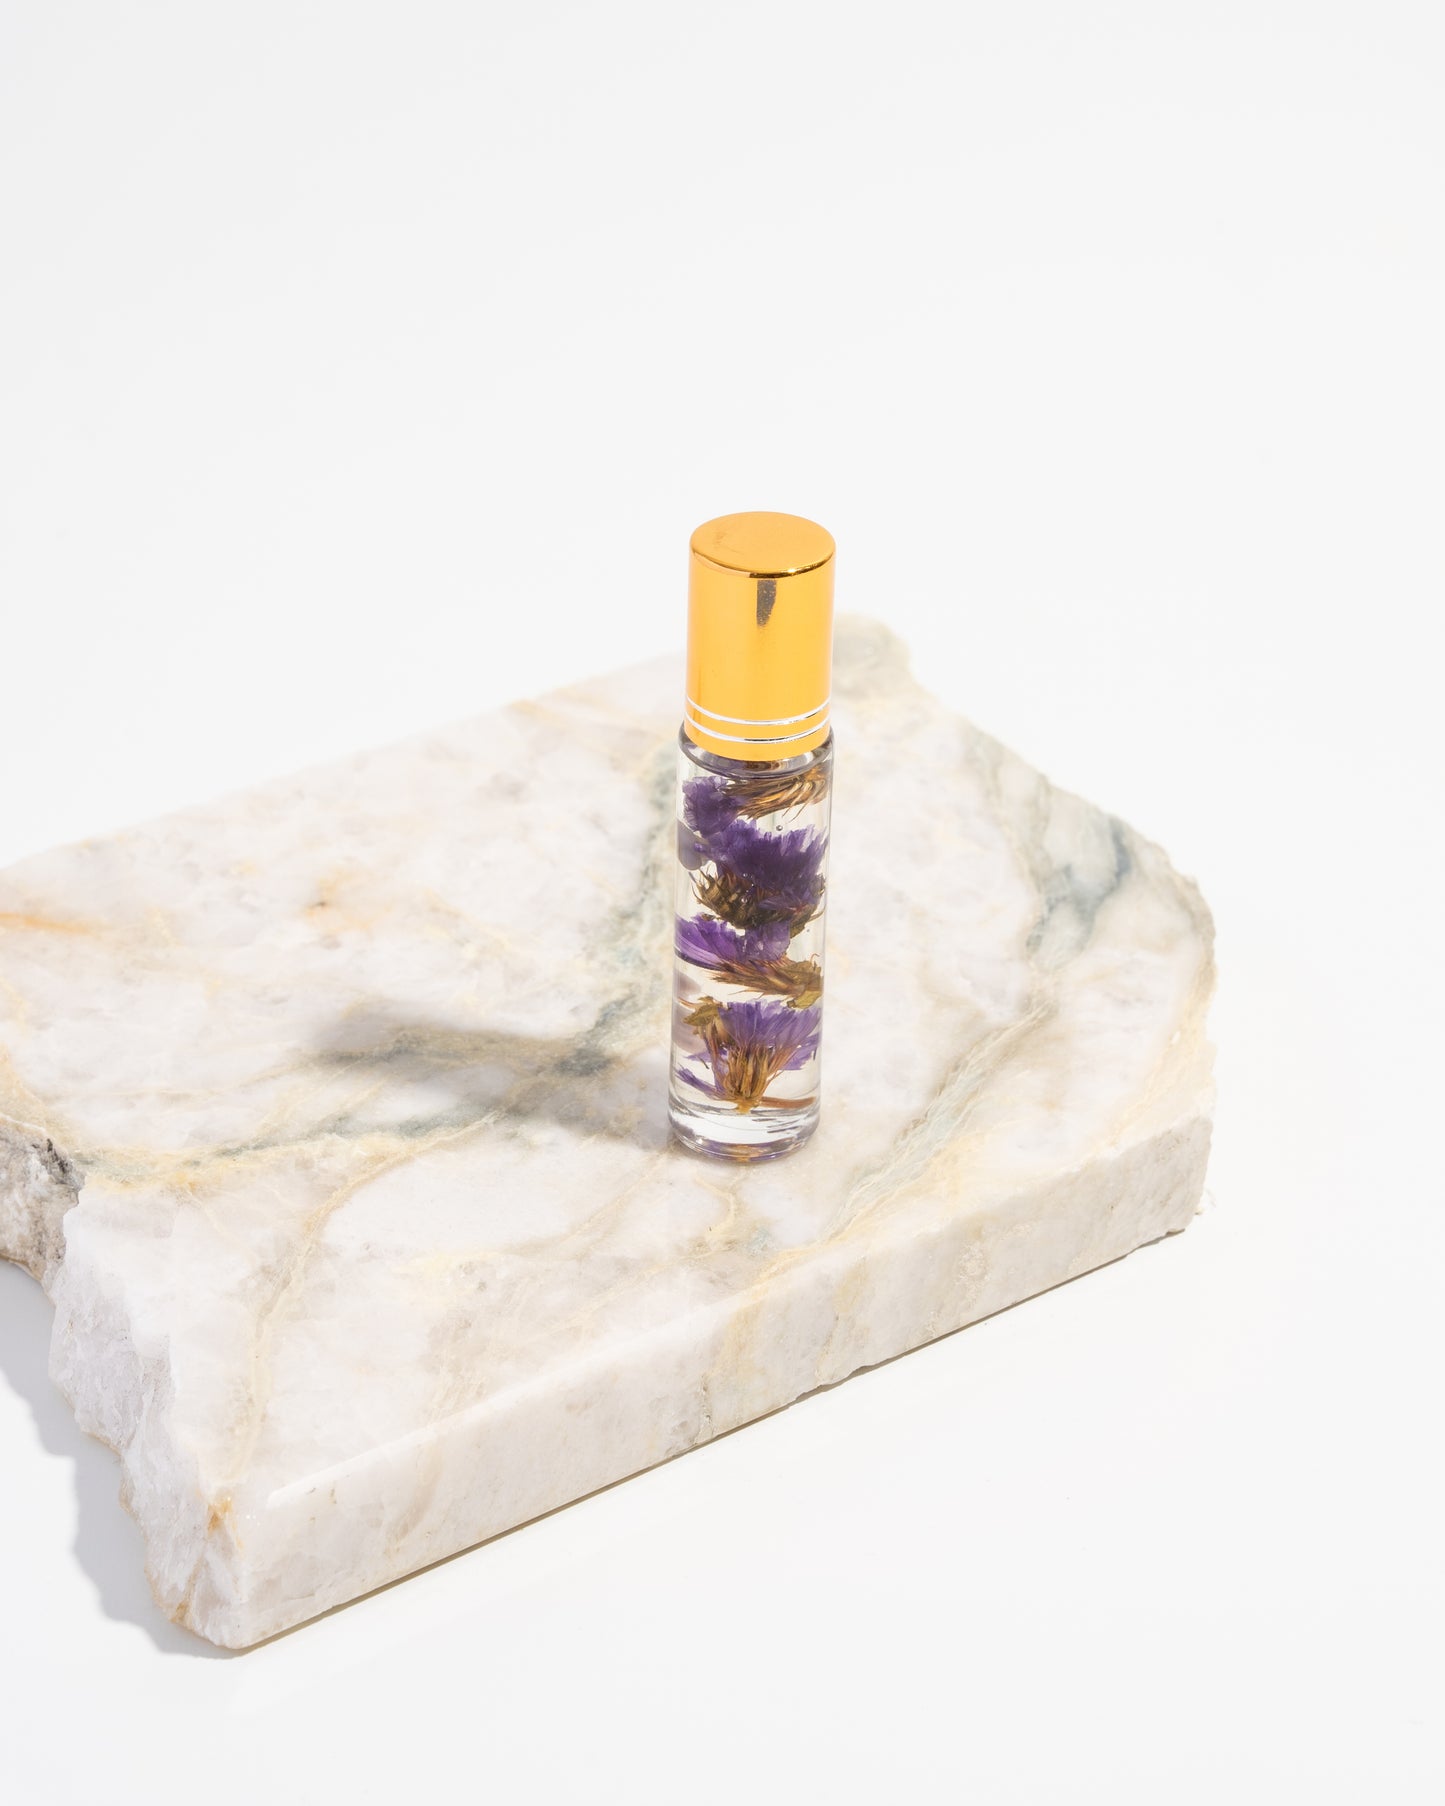 Tame fragrance potion | soothing, calm, and relaxation attracting oil roller with dried florals , crystals, and essential oils